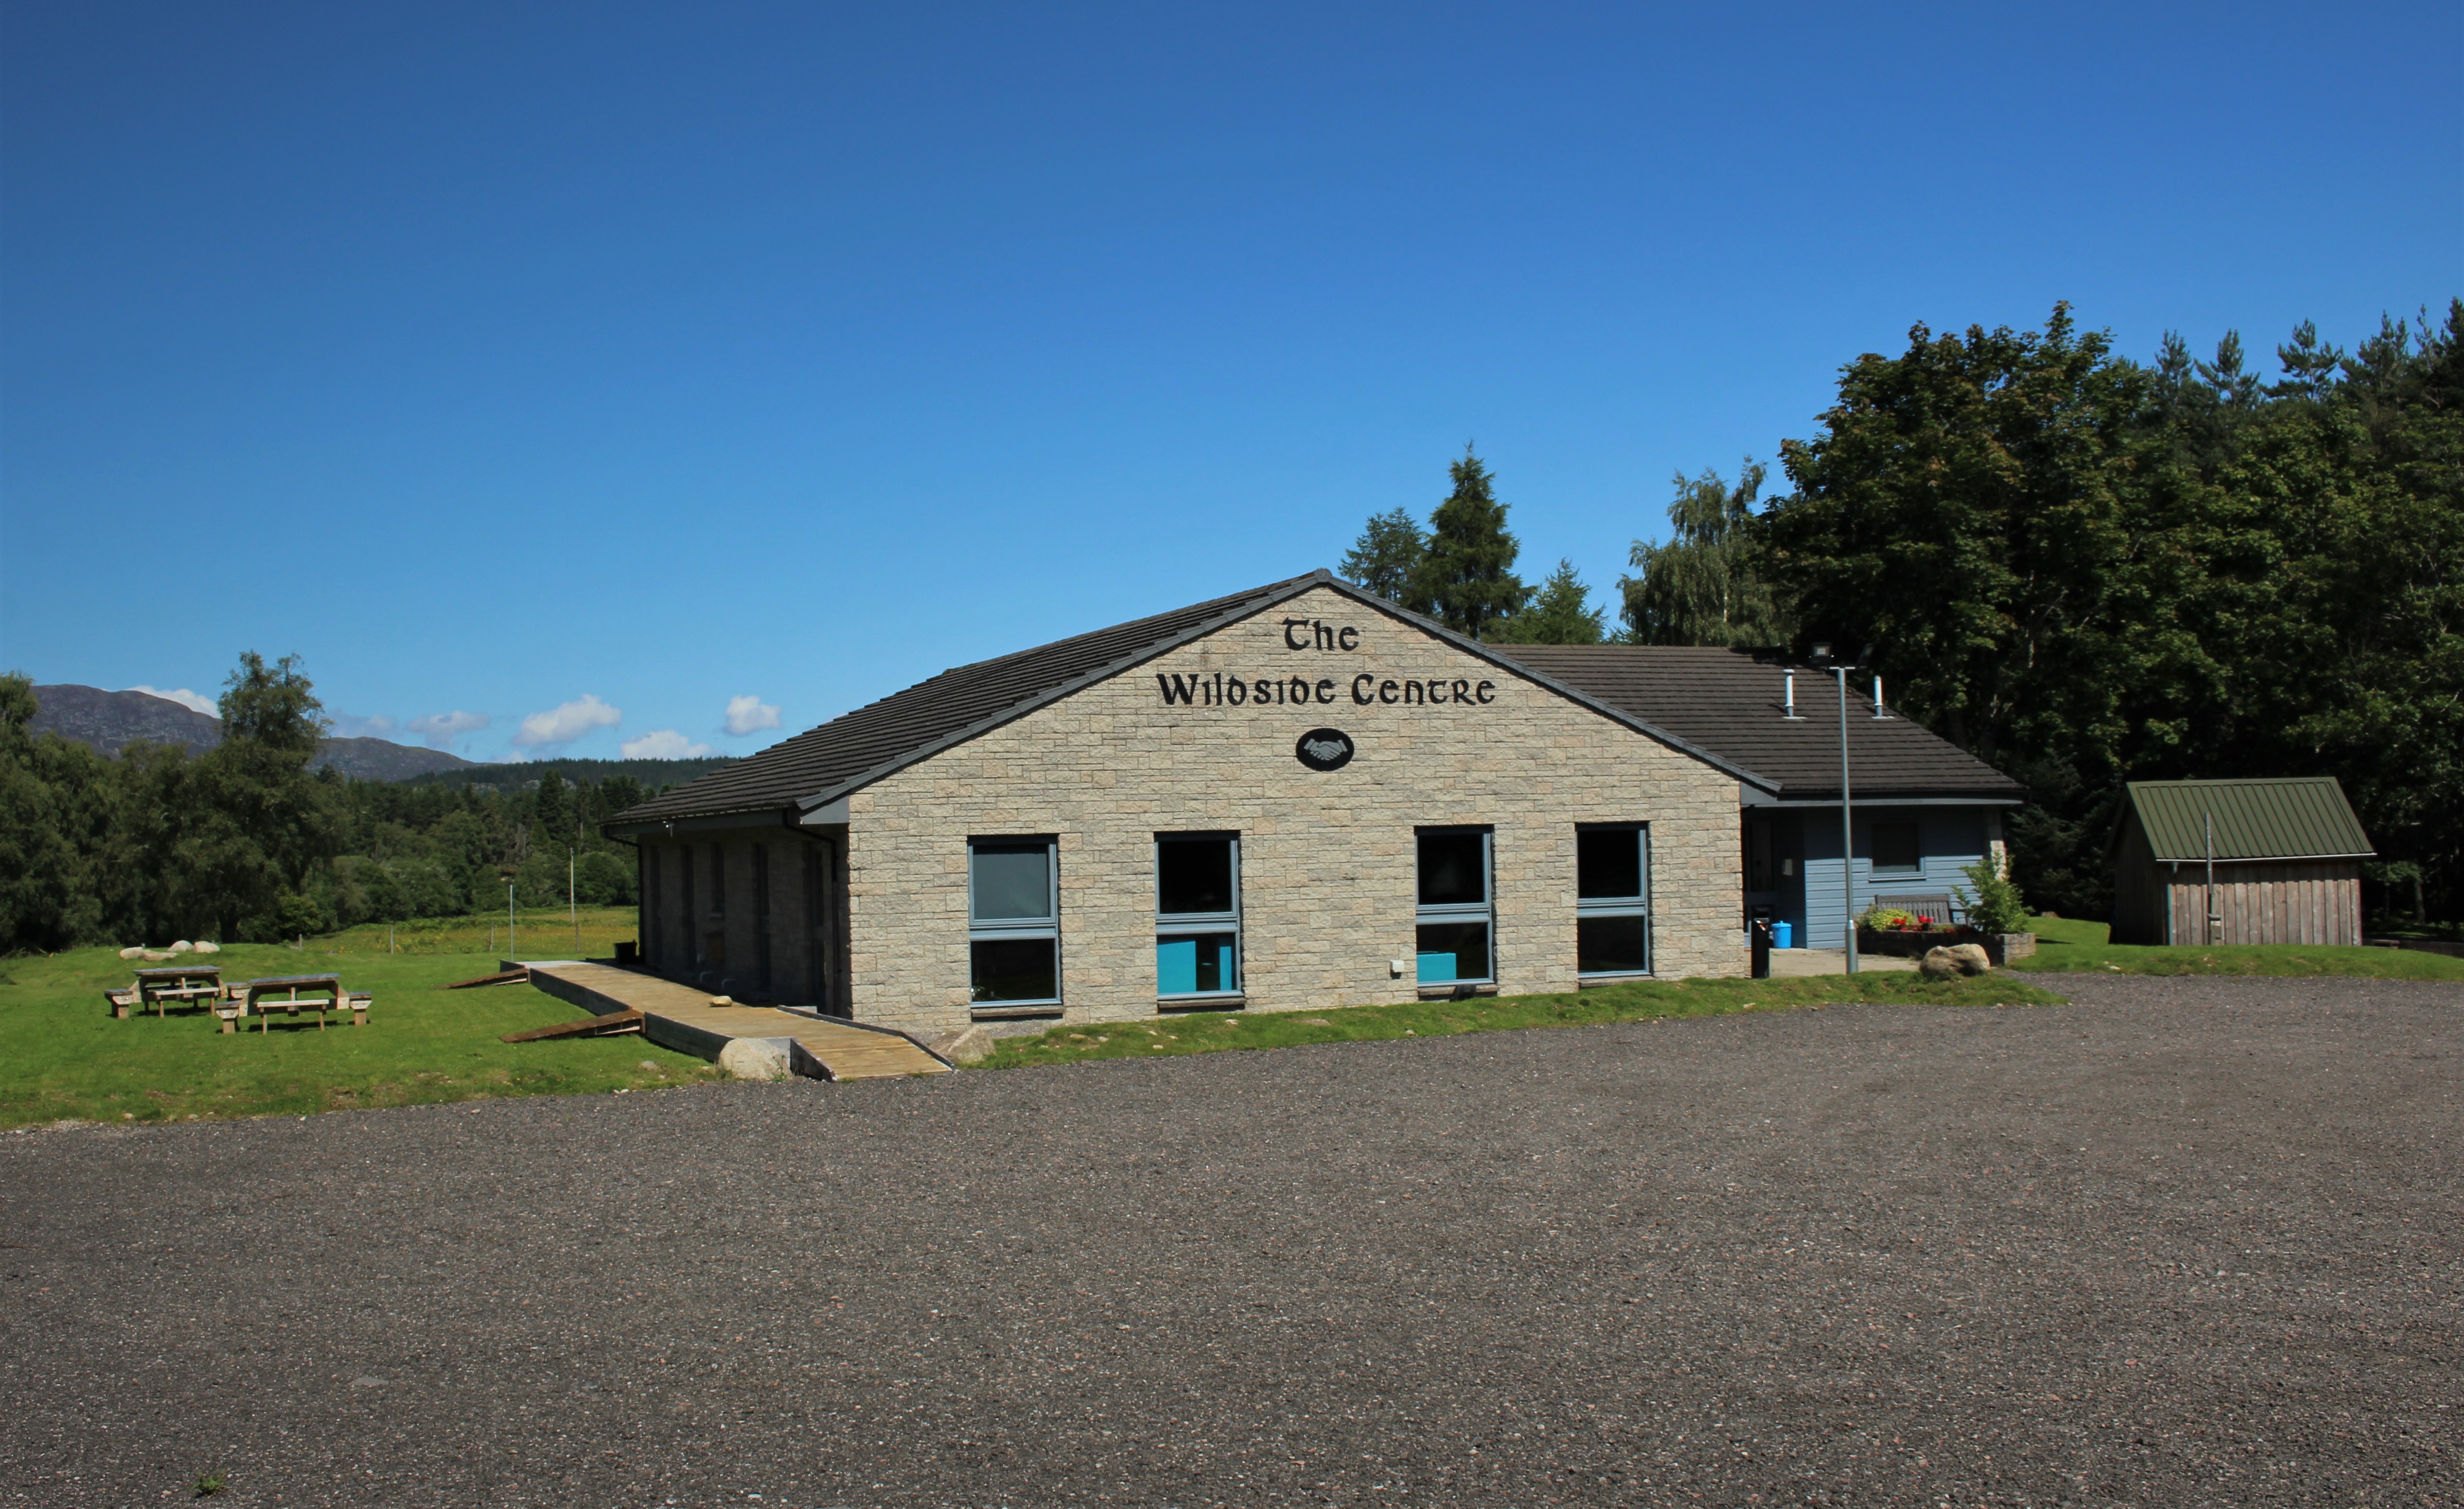 The Wildside Centre